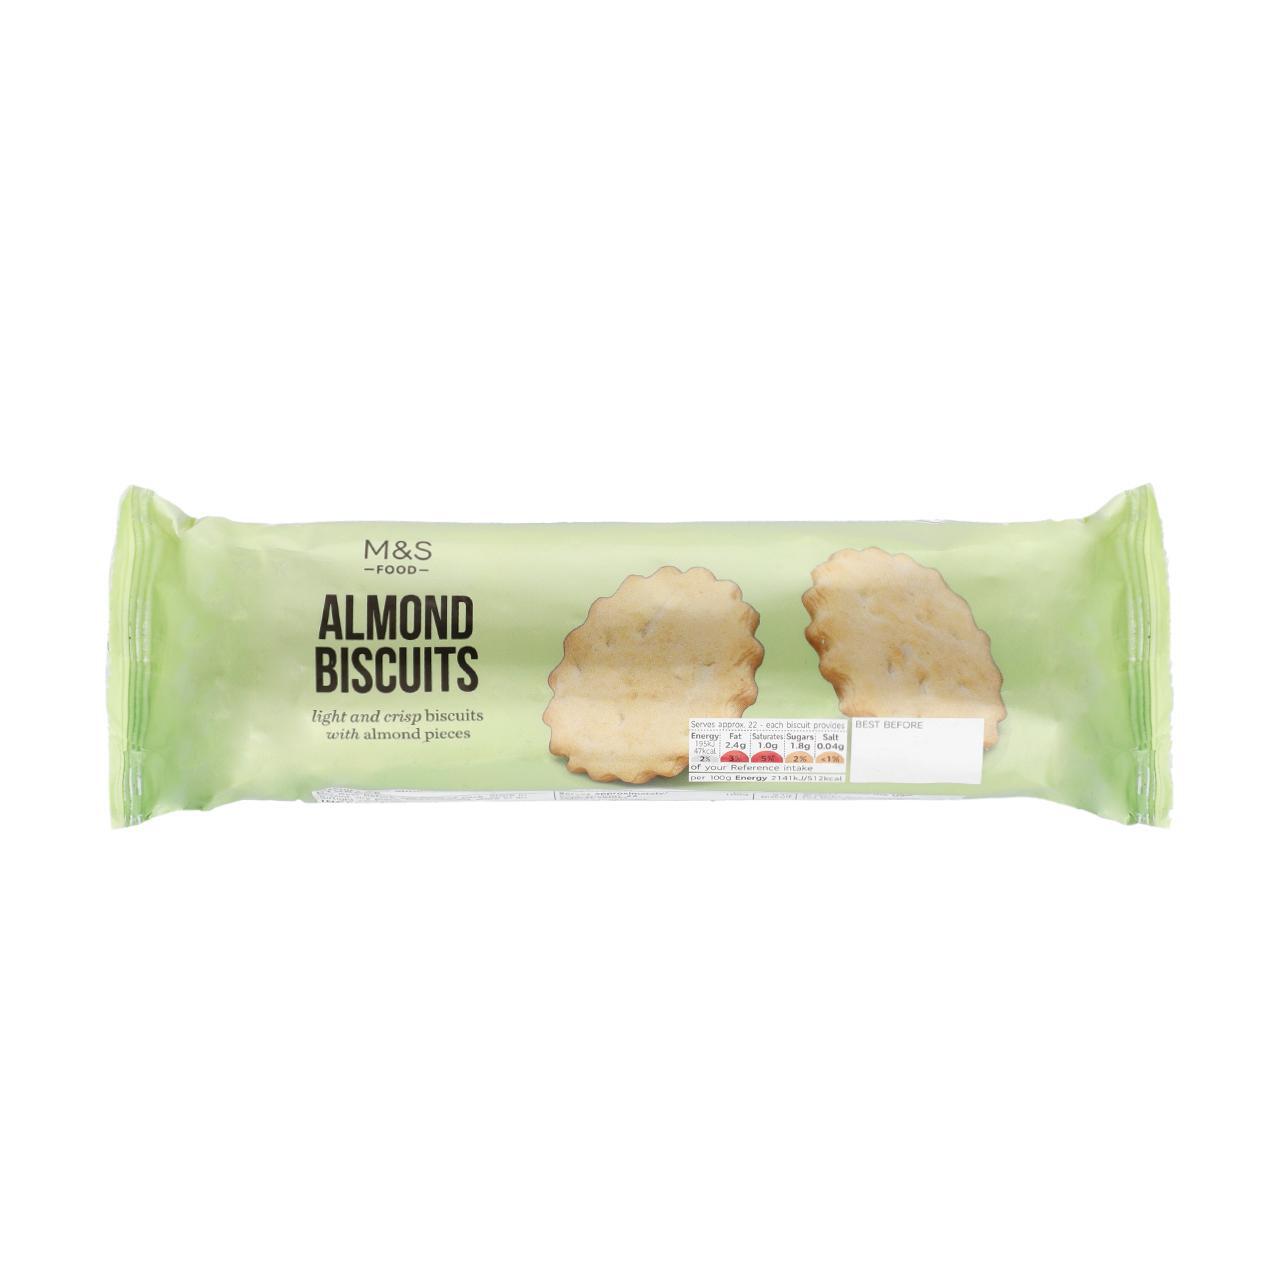 M&S Almond Biscuits 200g